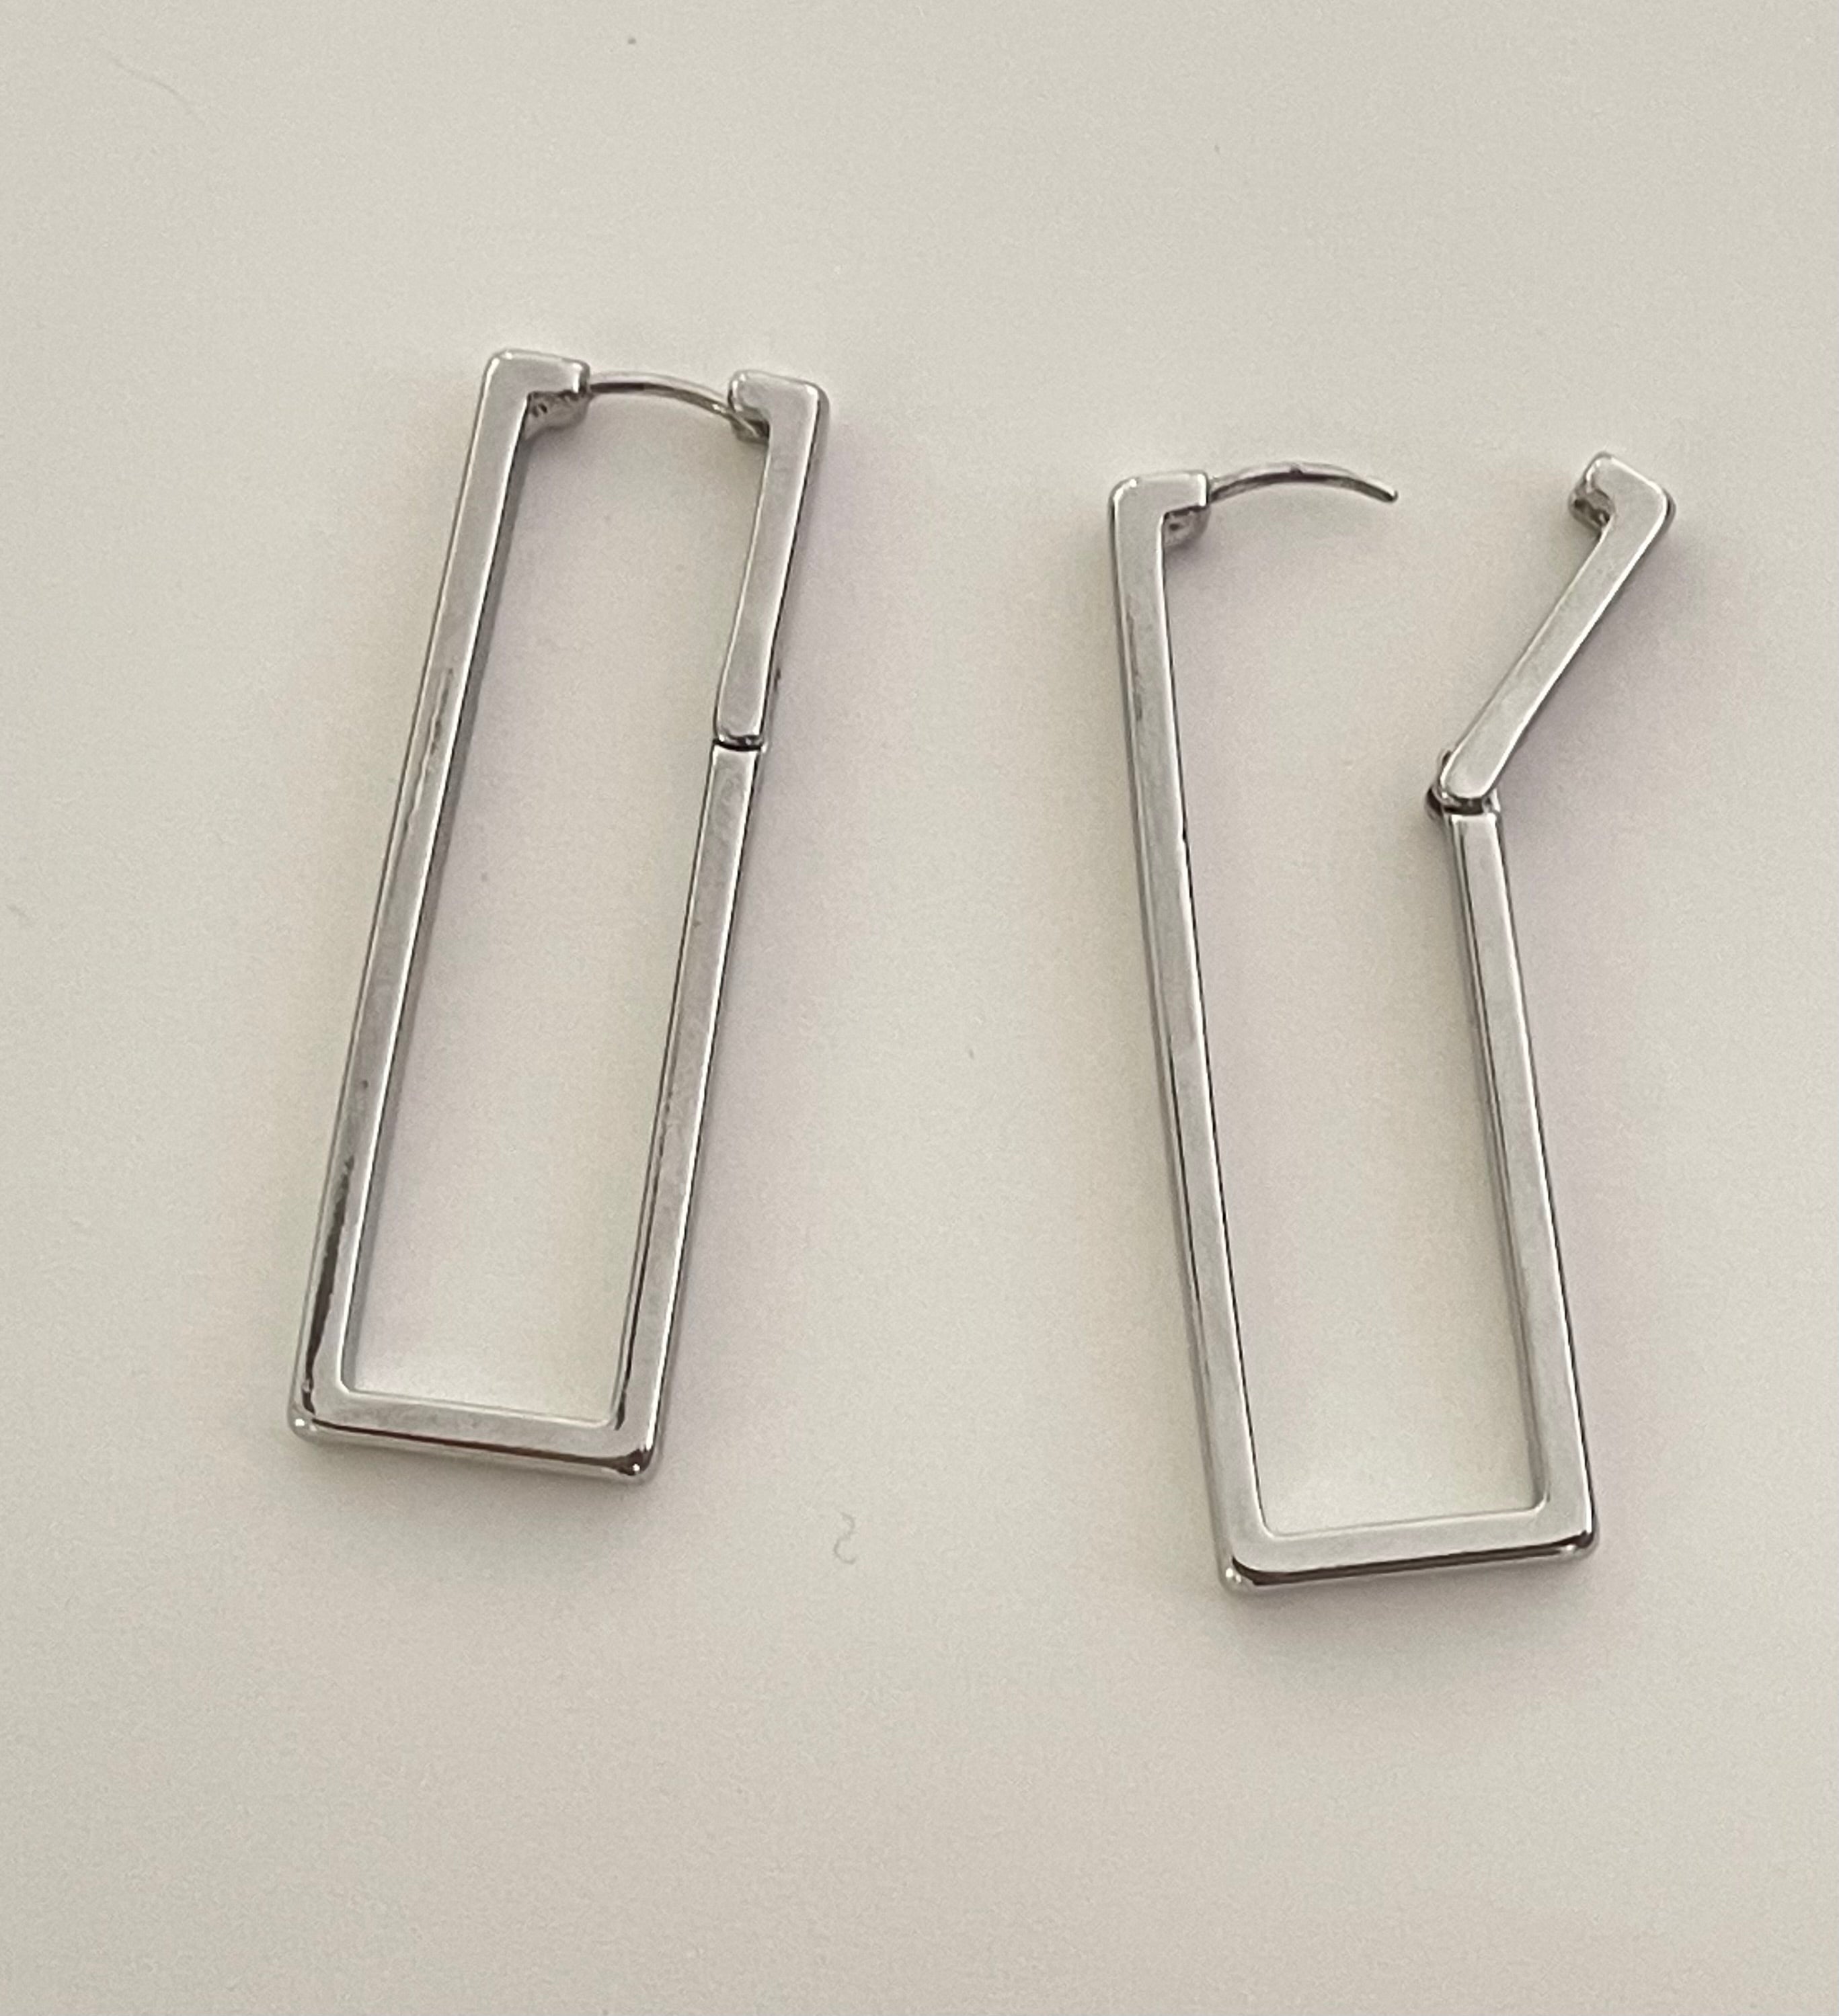 Stainless steel silver square hoops